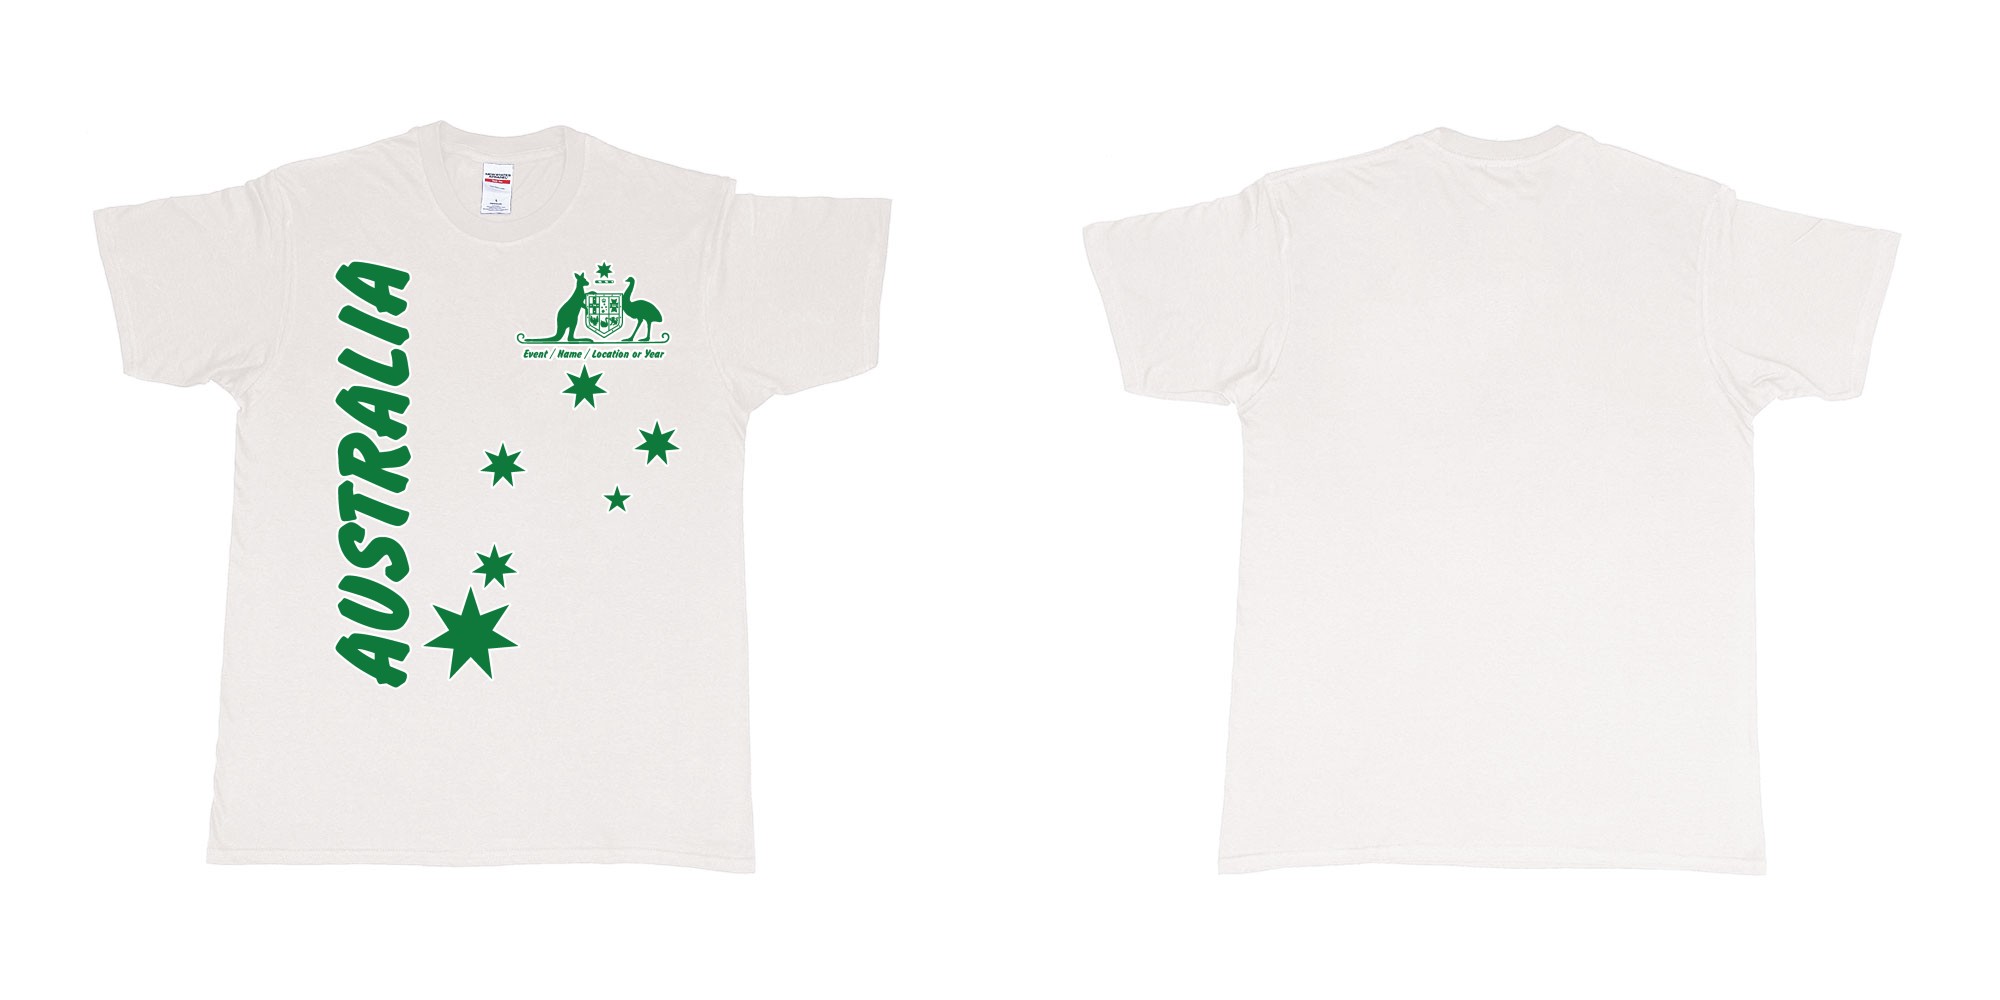 Custom tshirt design australia day vintage green white gold in fabric color white choice your own text made in Bali by The Pirate Way